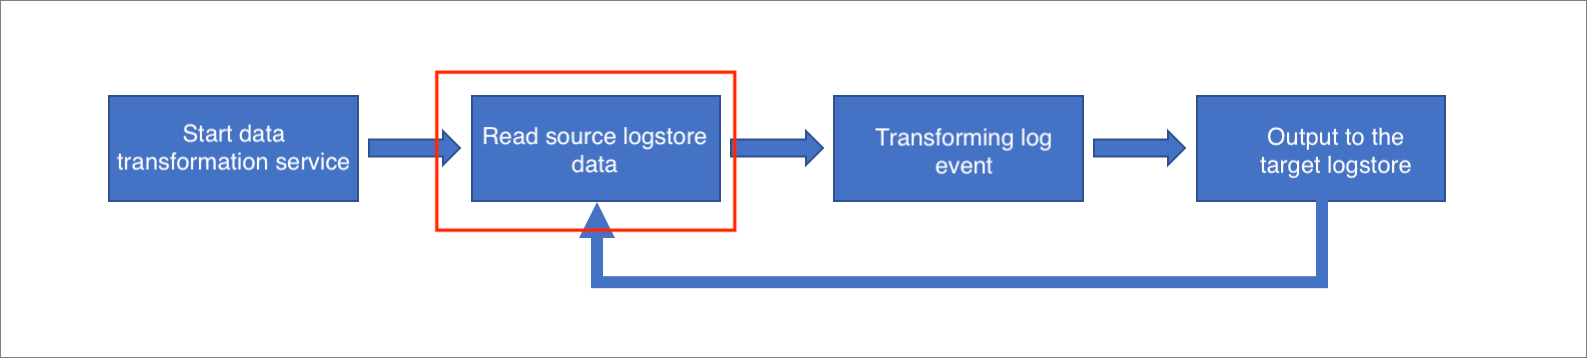 How can I fix errors that occur when the data transformation engine reads data from a source Logstore?